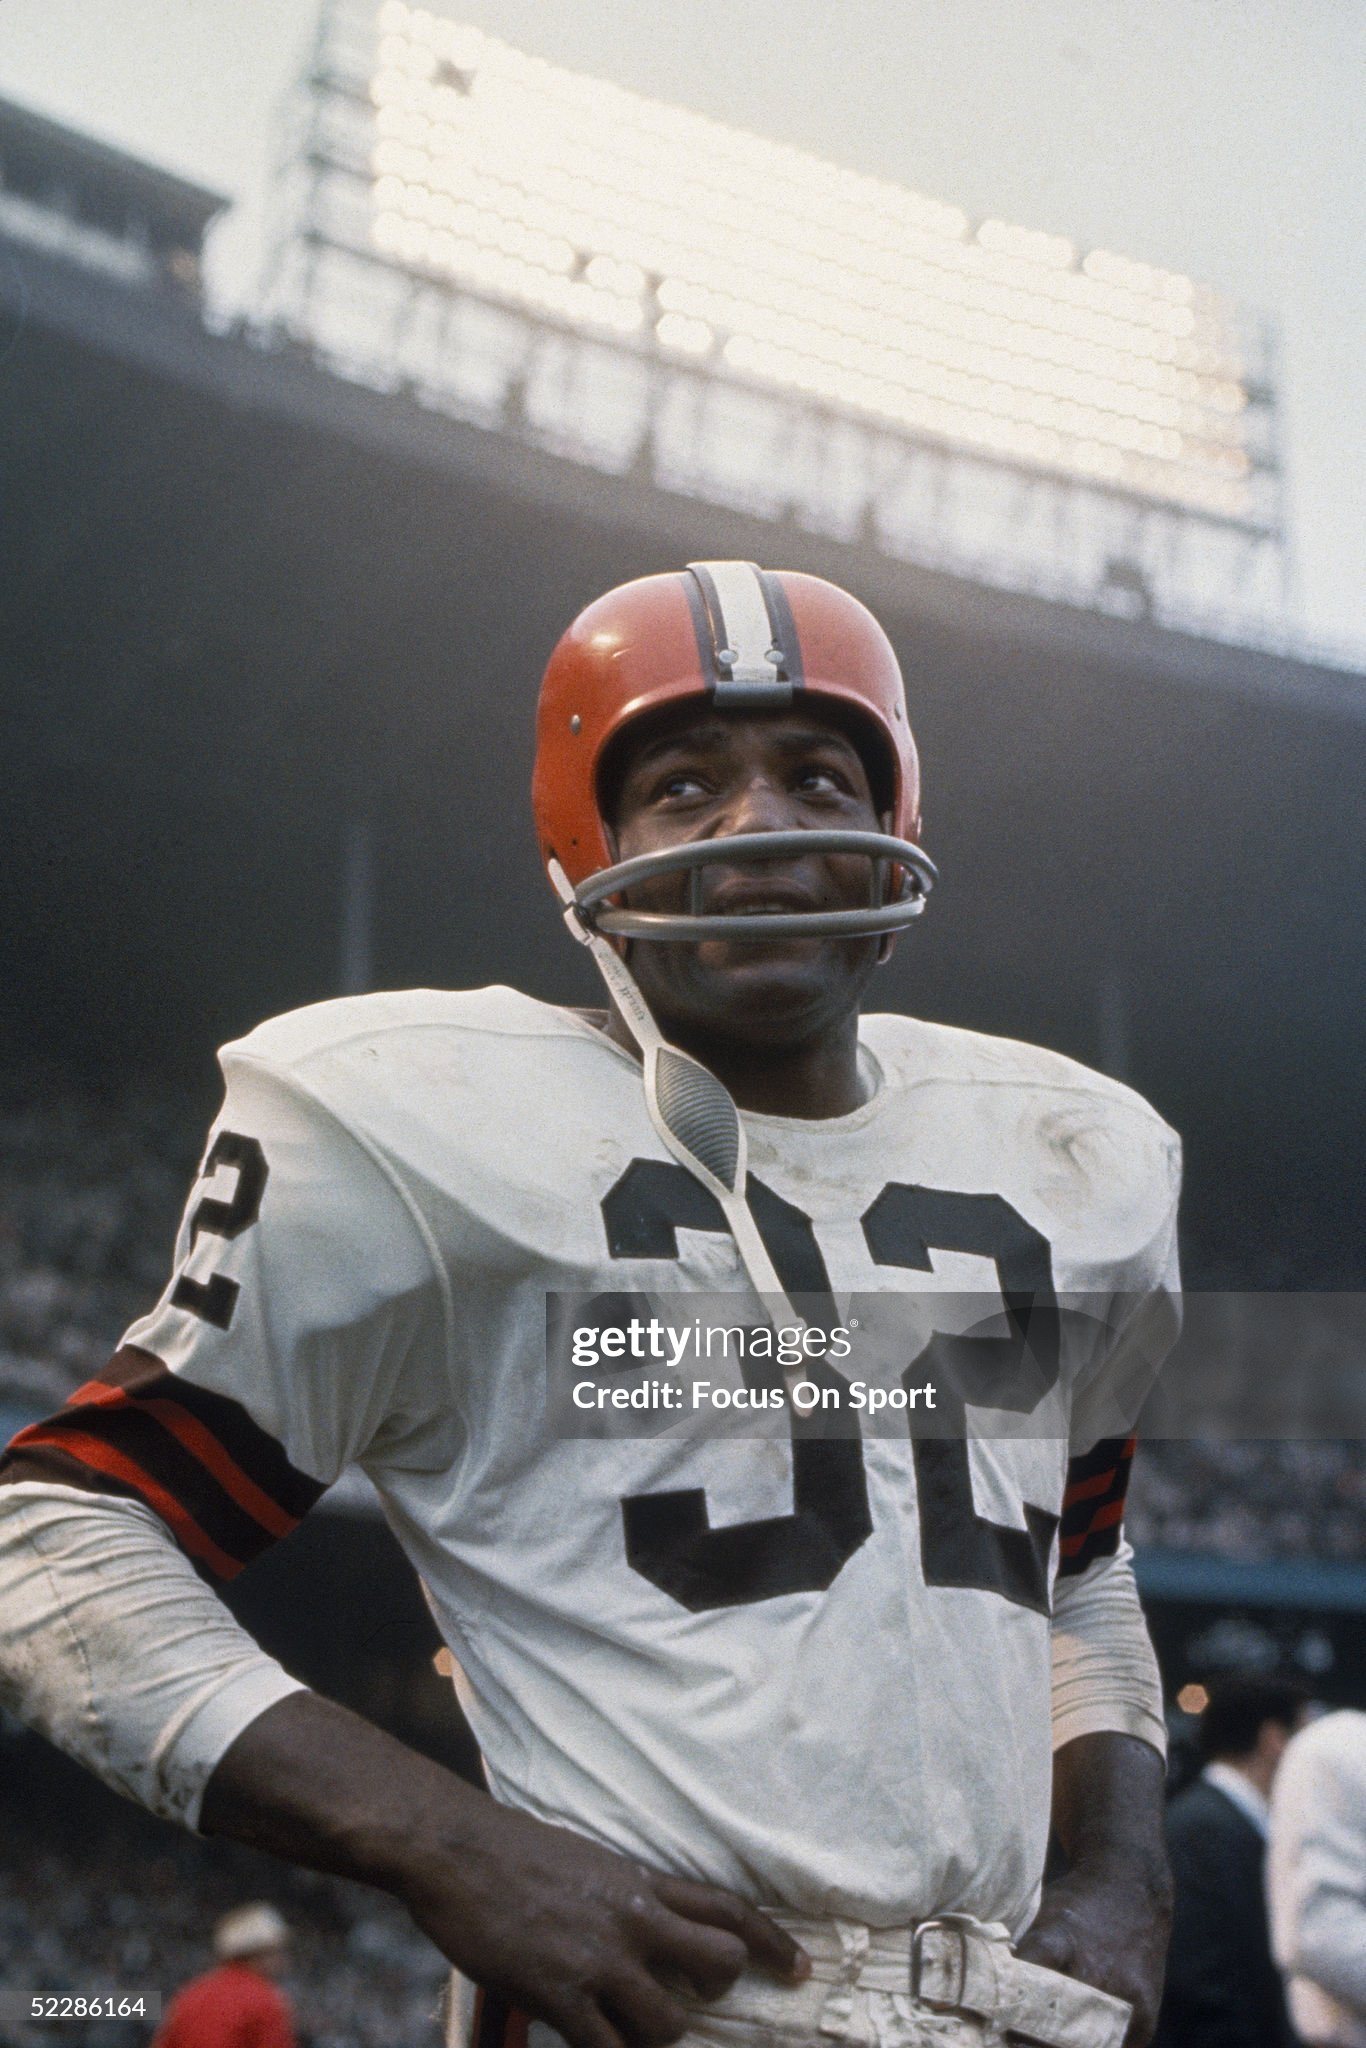 cleveland-browns-jim-brown-on-the-field.jpg